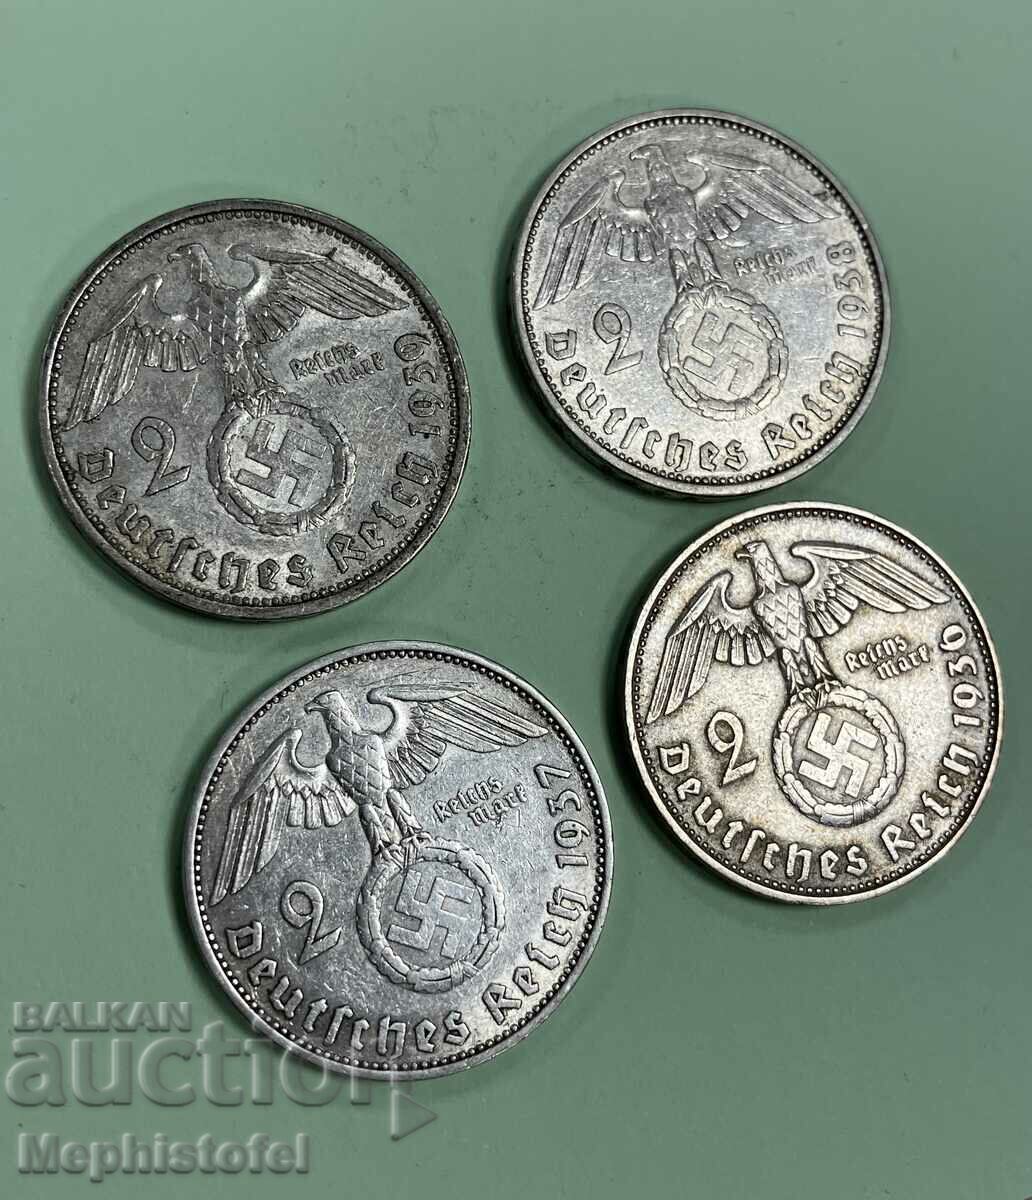 Lot of 4 pcs. 2 Reichsmarks 1936-1939 - silver coins